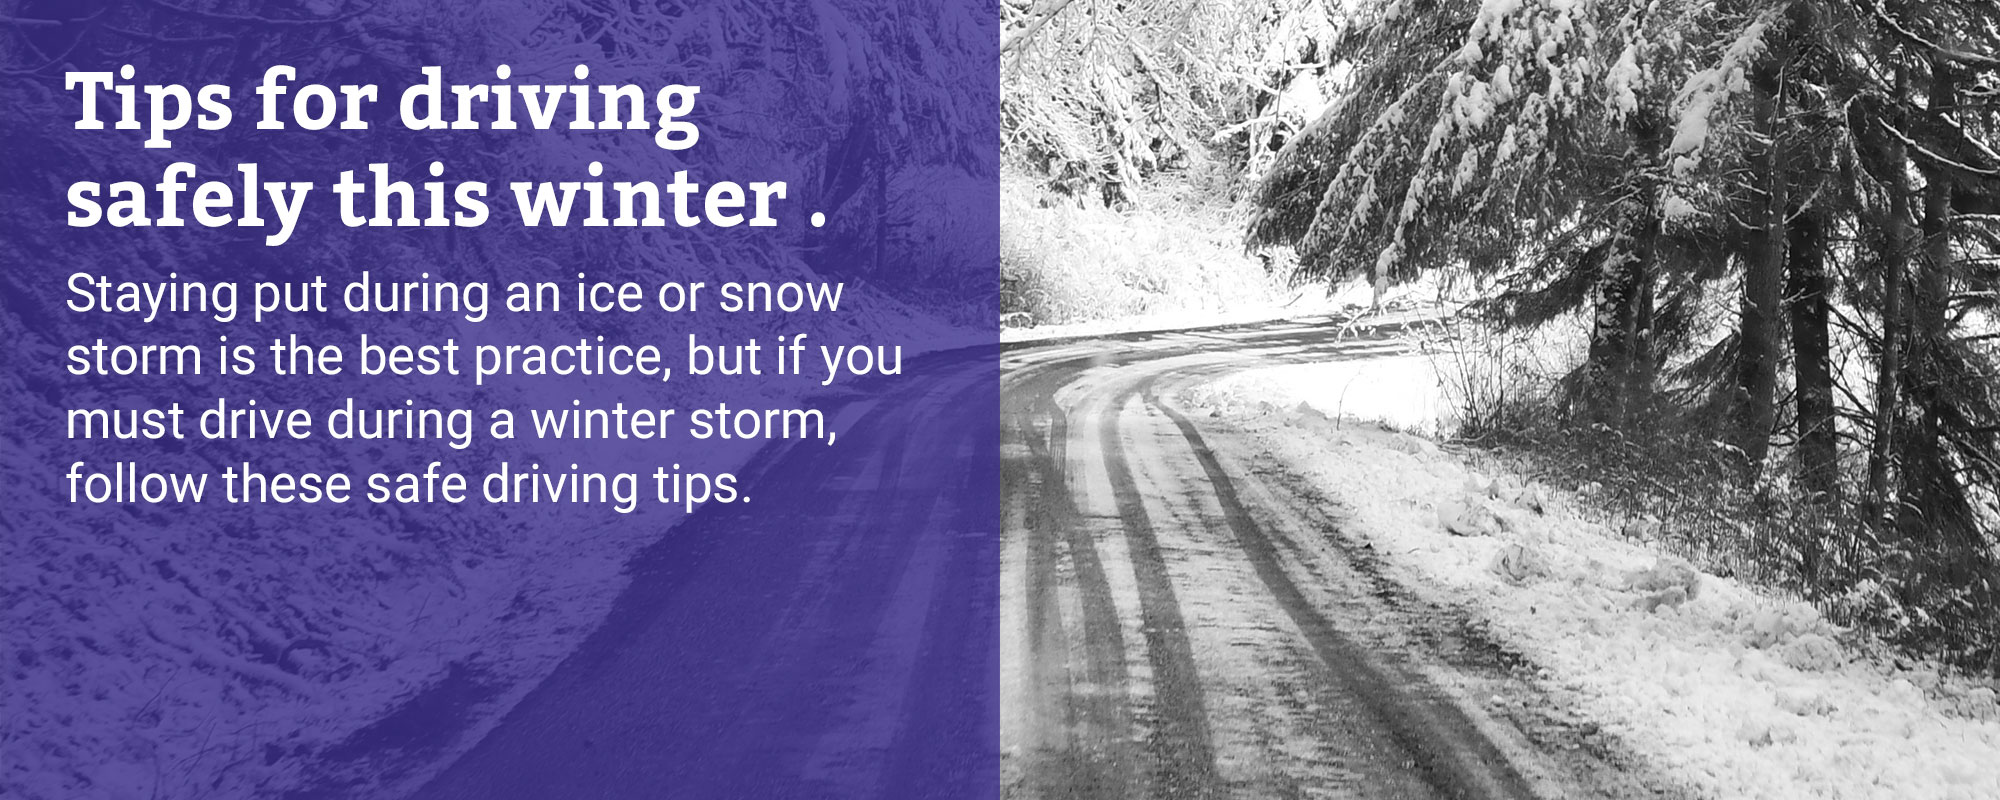 Tips for driving safely this winter